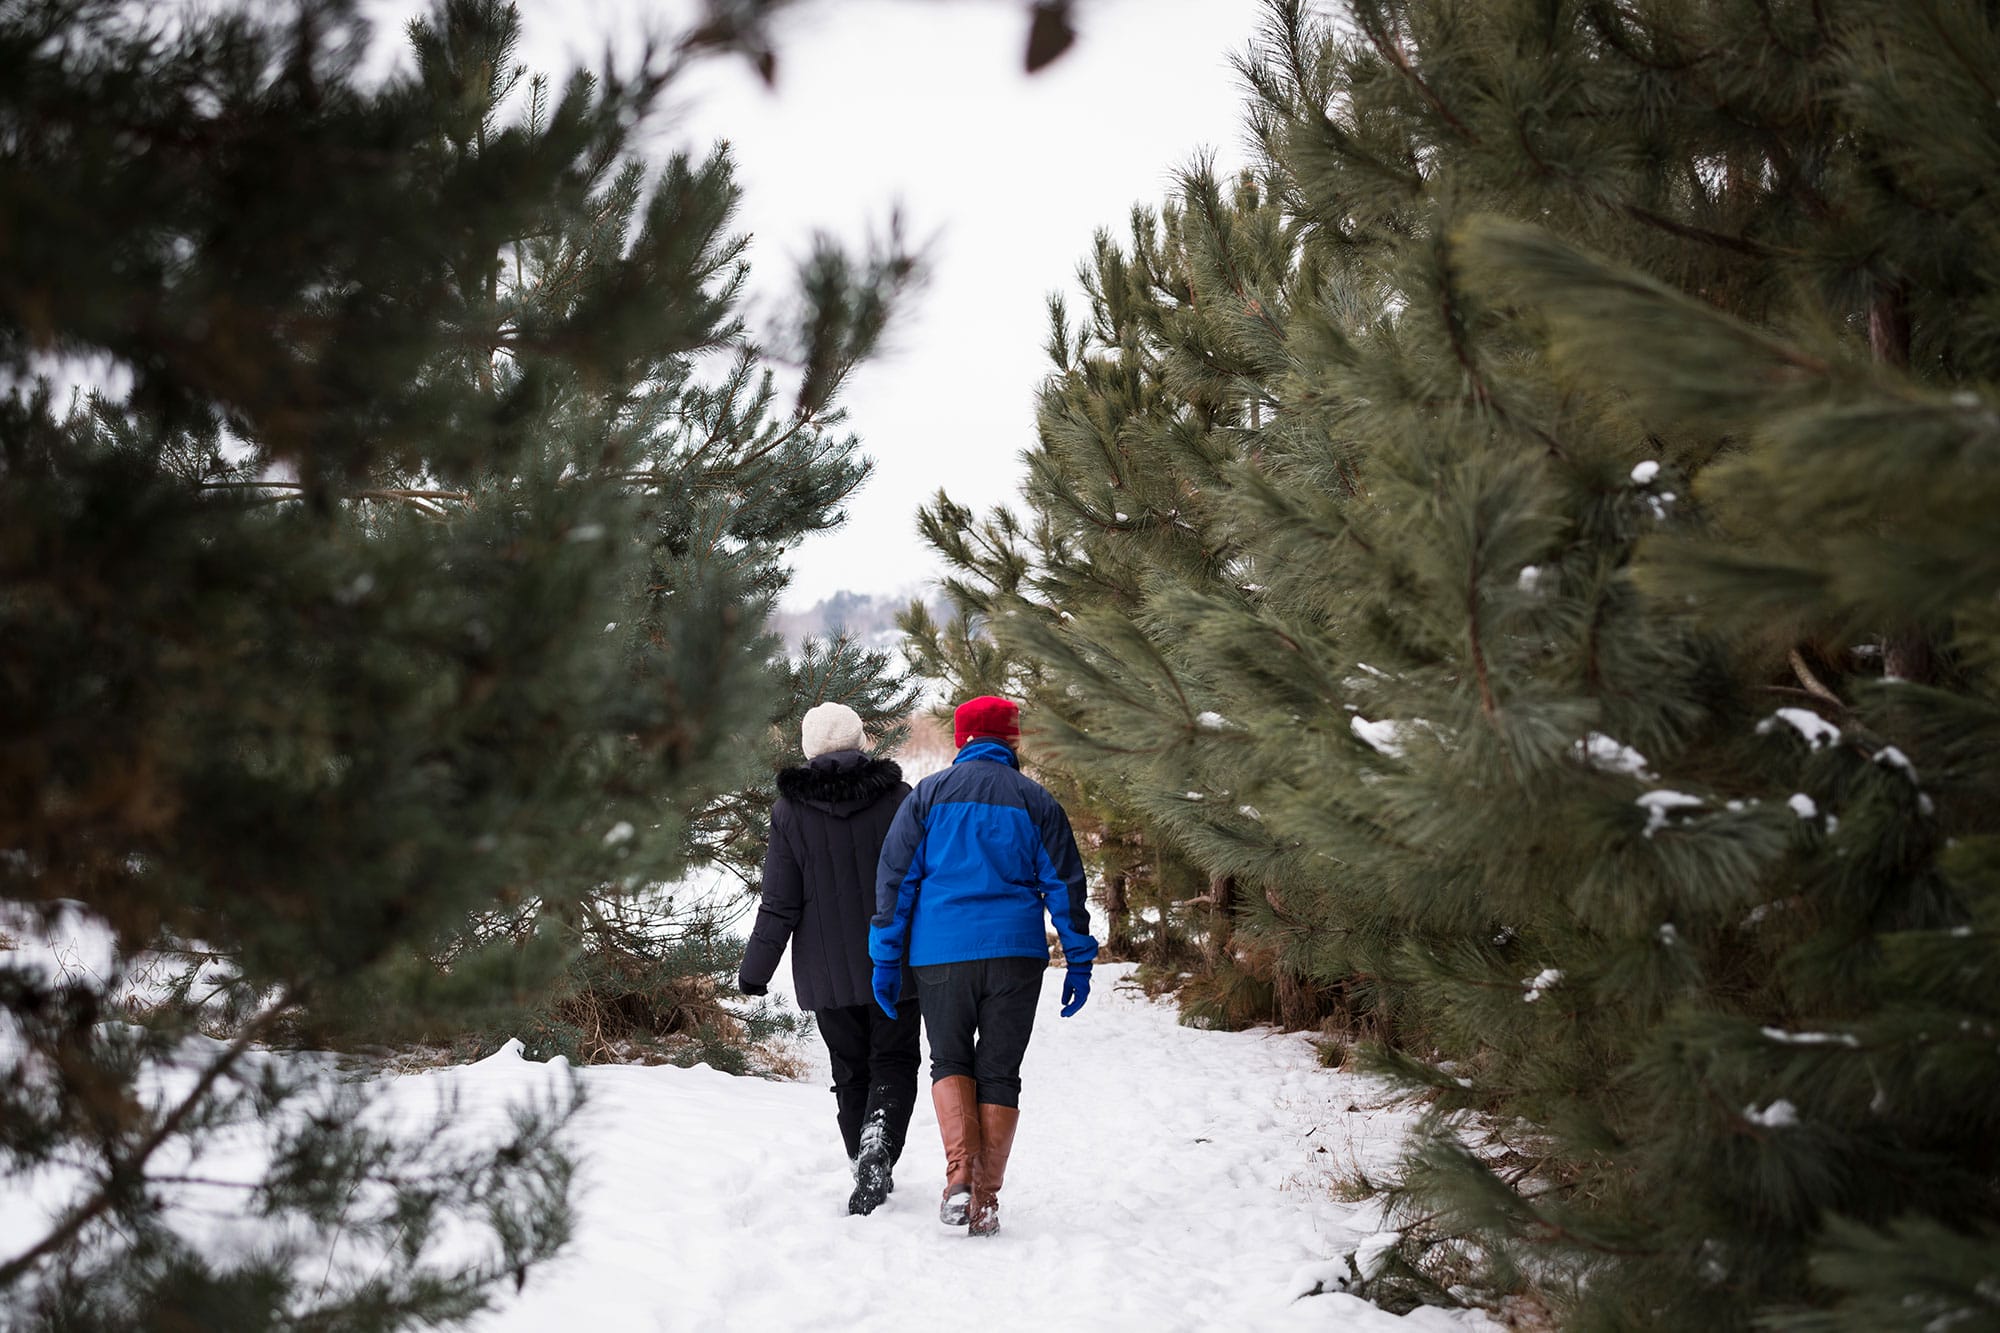 Two people walking through a snowy forest.